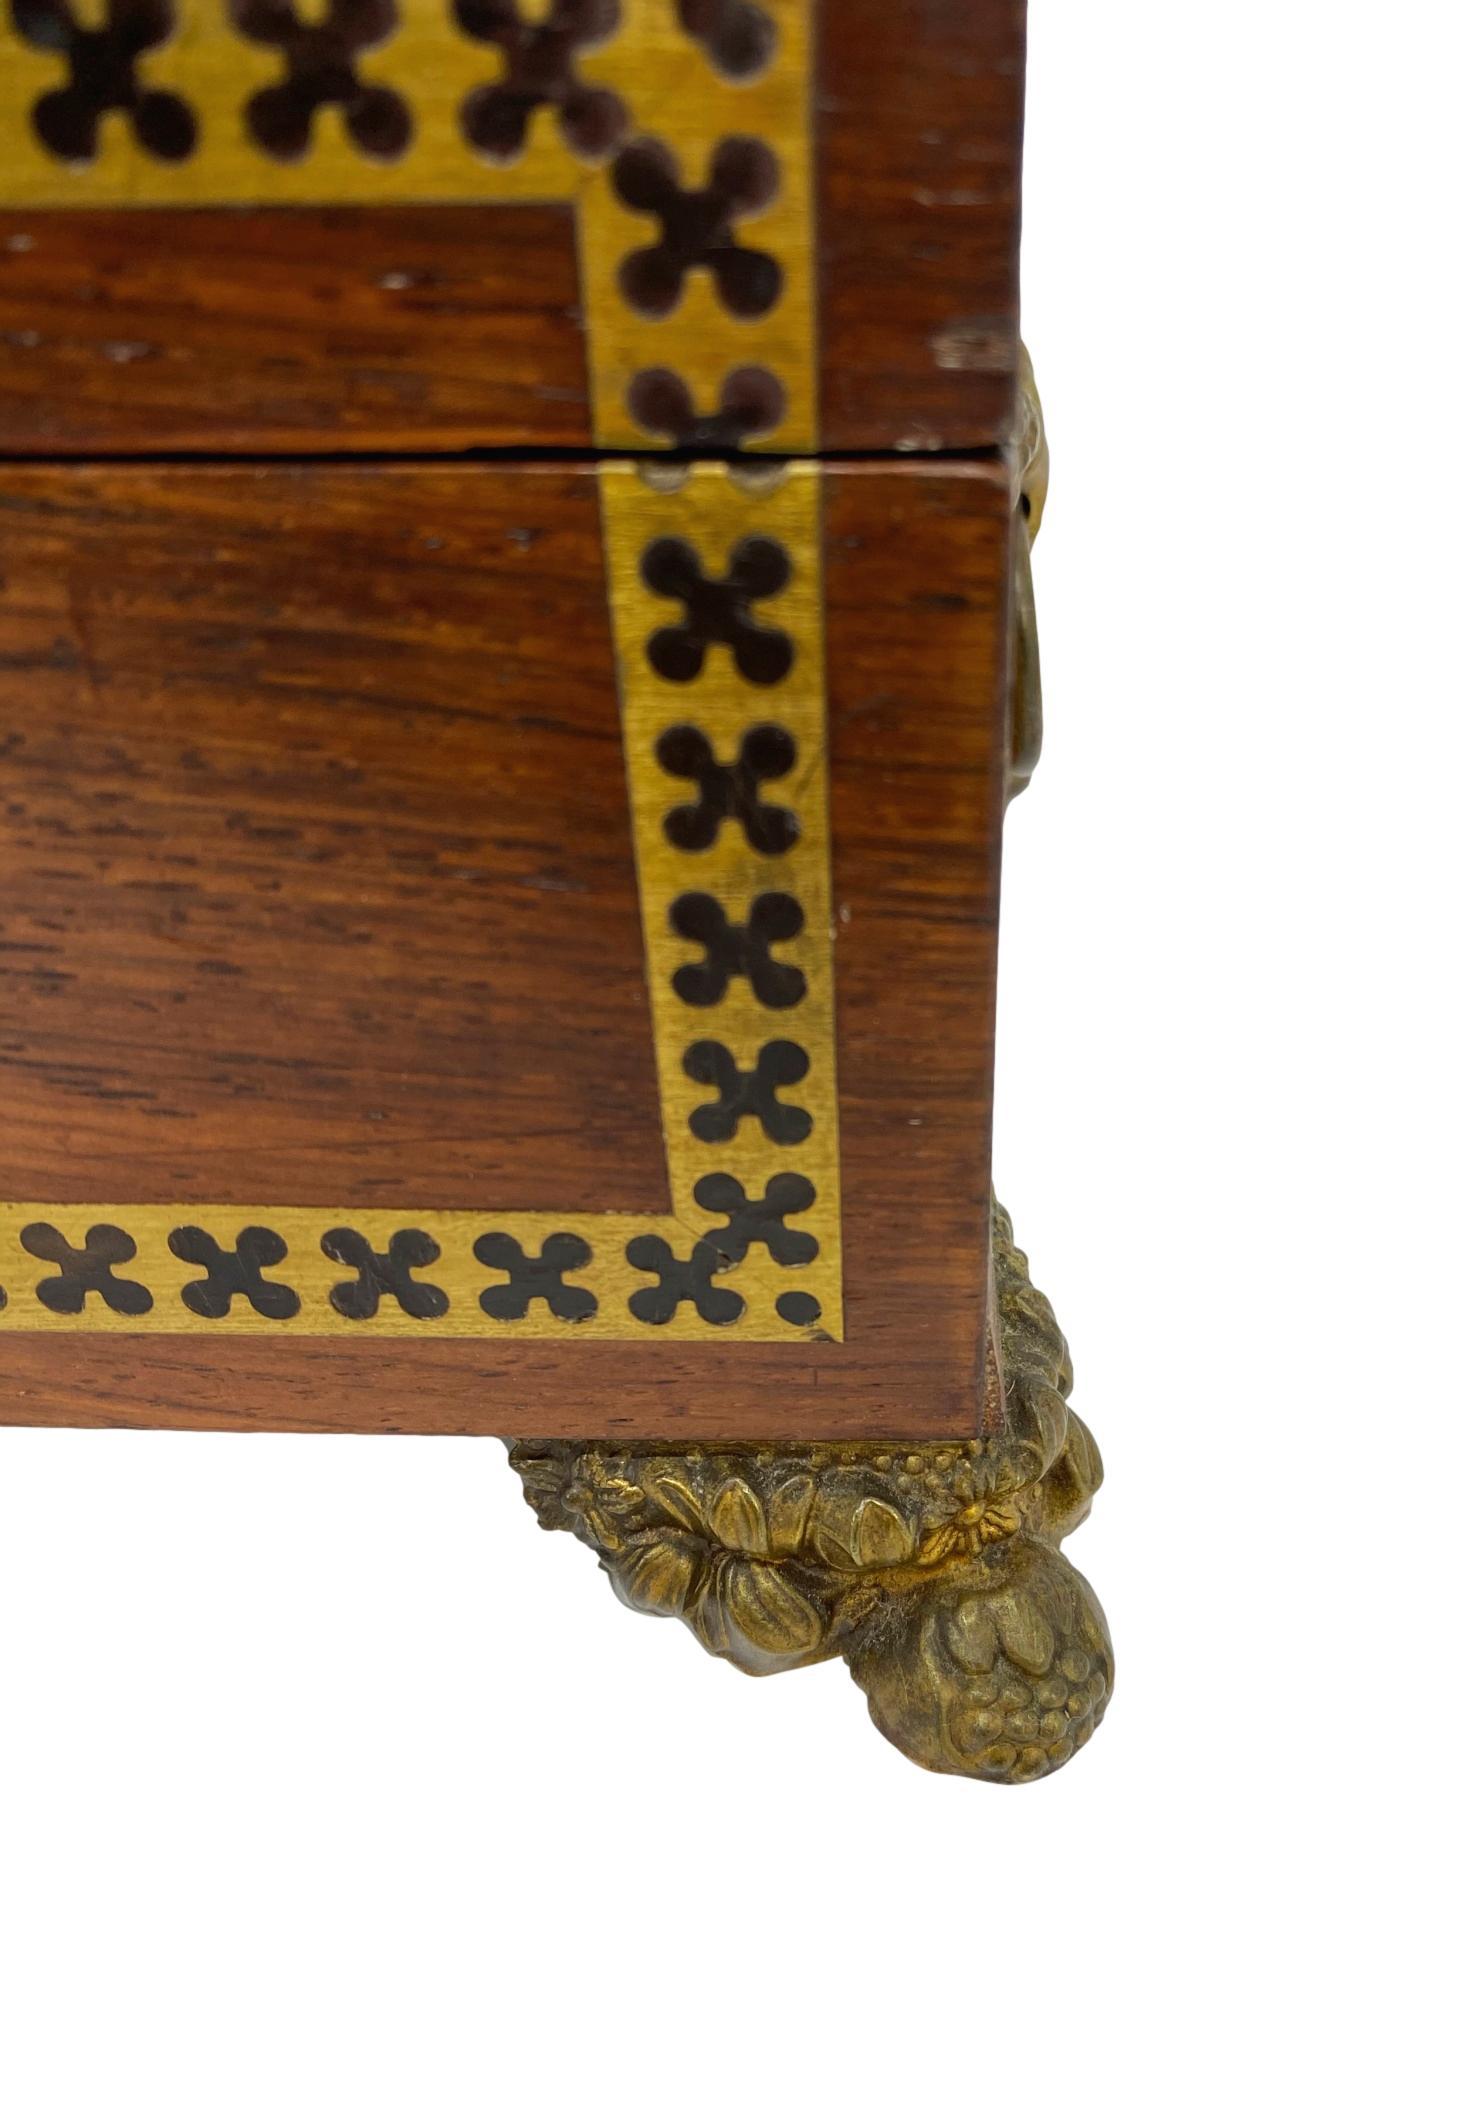 Antique Regency Box in Rosewood with Inlaid Ebony and Brass, English, circa 1820 For Sale 2